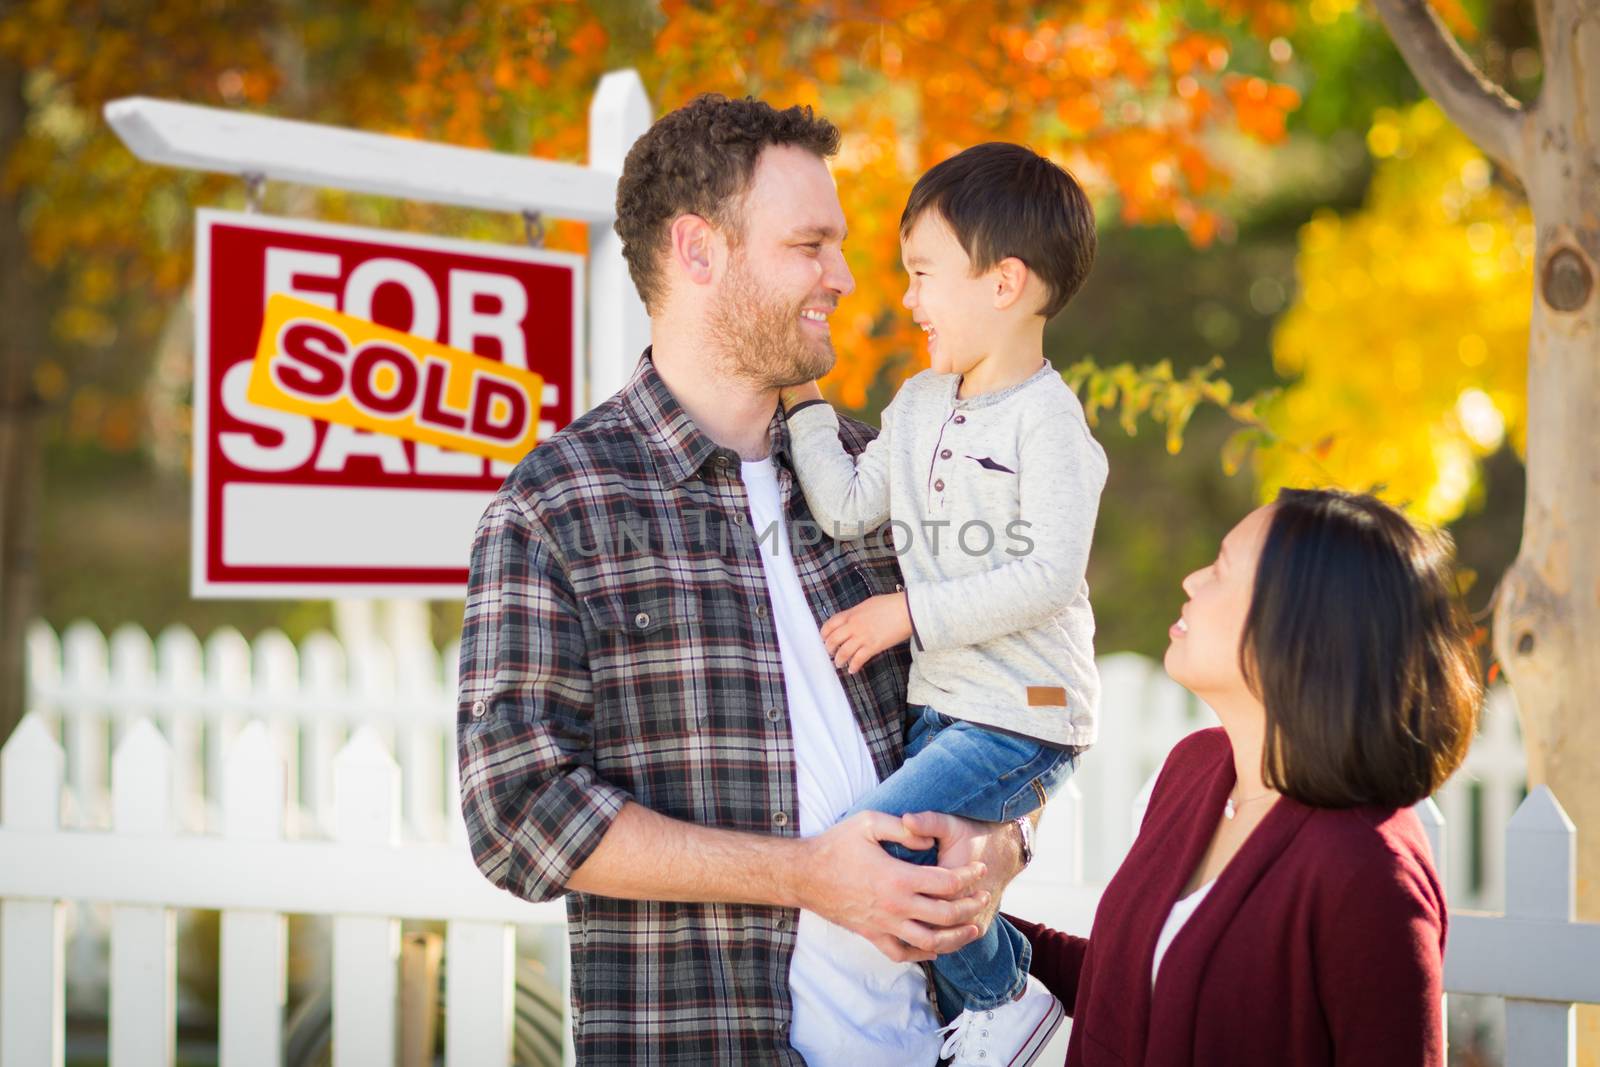 Mixed Race Chinese and Caucasian Parents and Child In Front of Fence and Sold For Sale Real Estate Sign. by Feverpitched